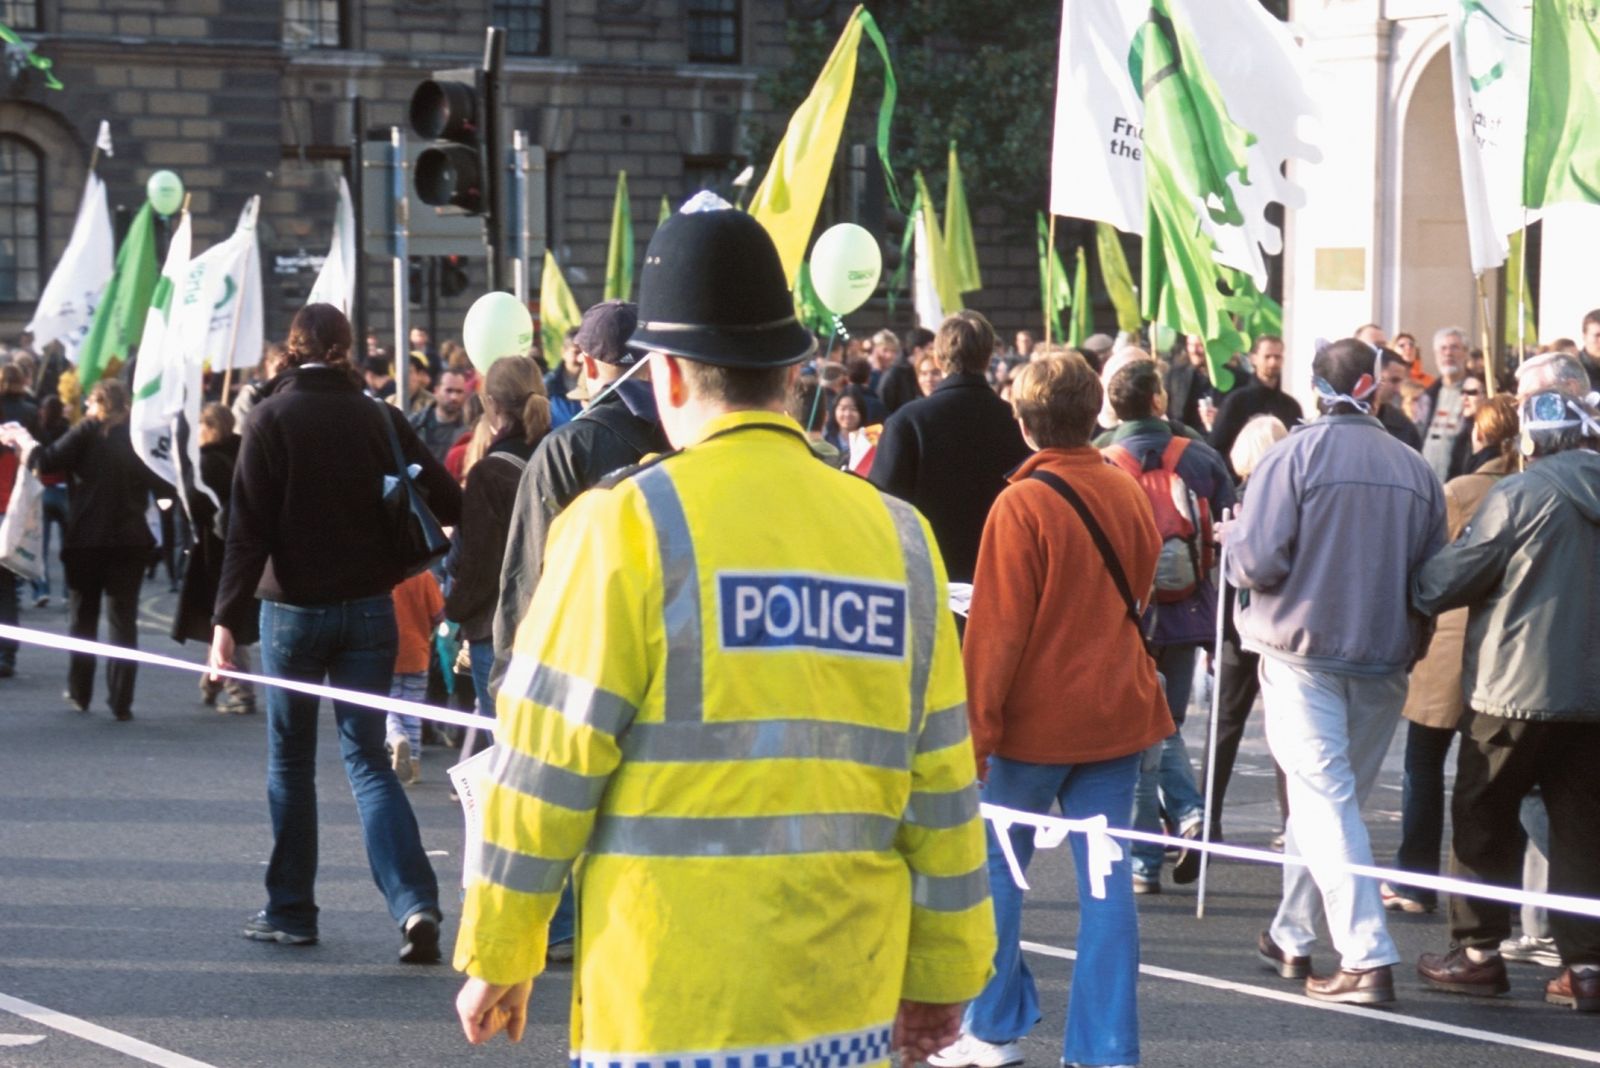 Police officer at Downing Street